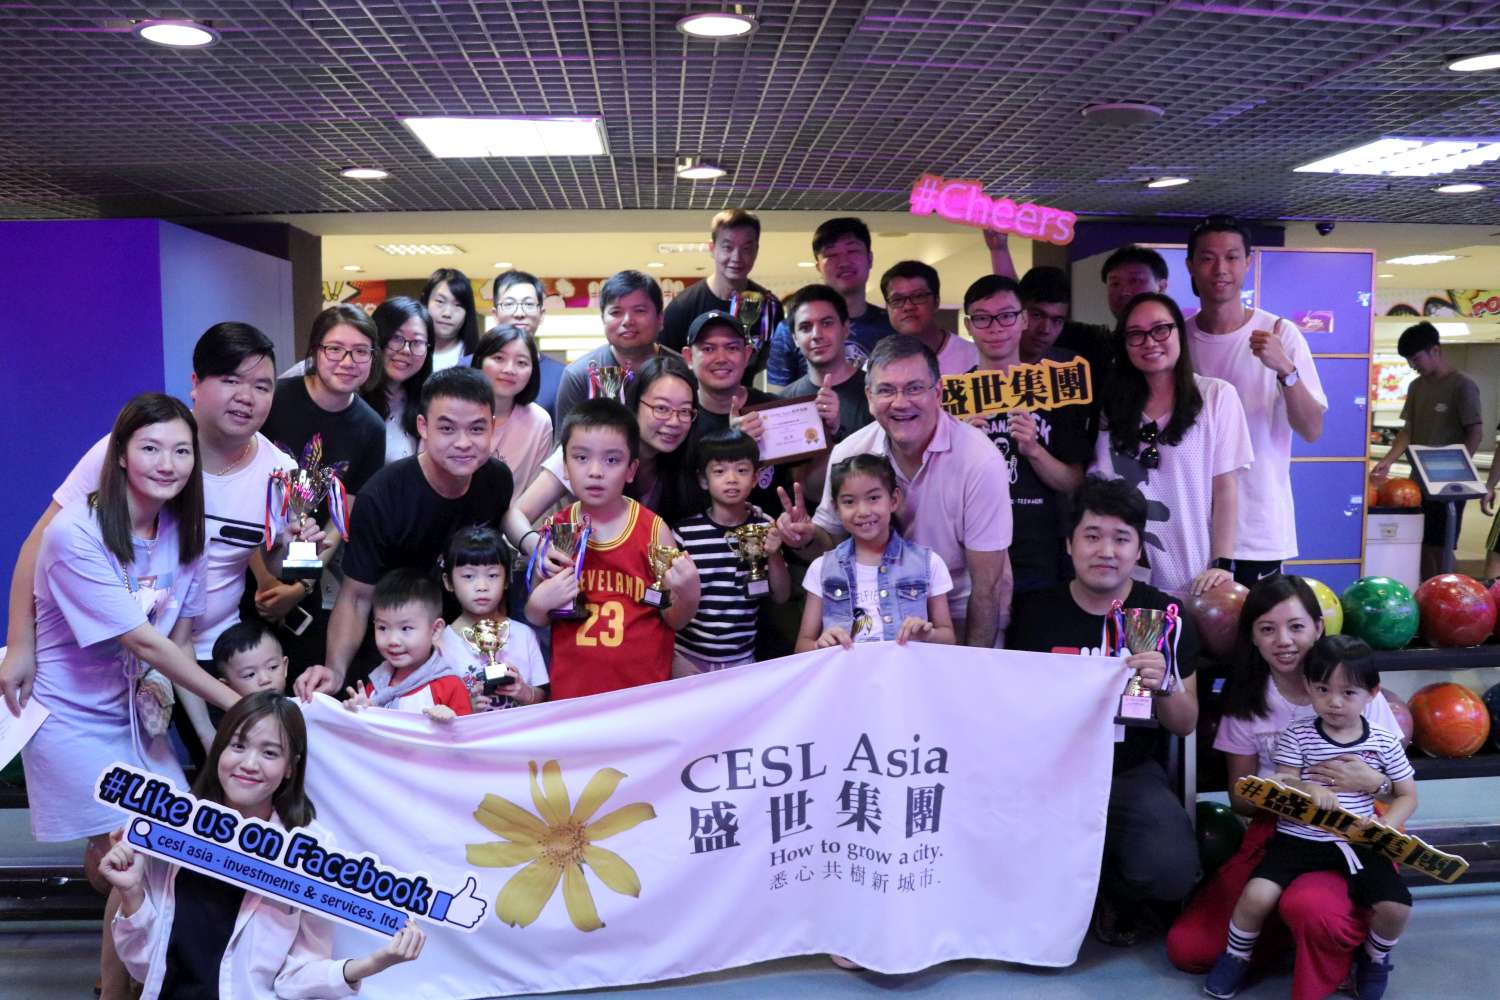 CESL Asia Staff and Family Bowling Competition 2018 (2018/07/21)